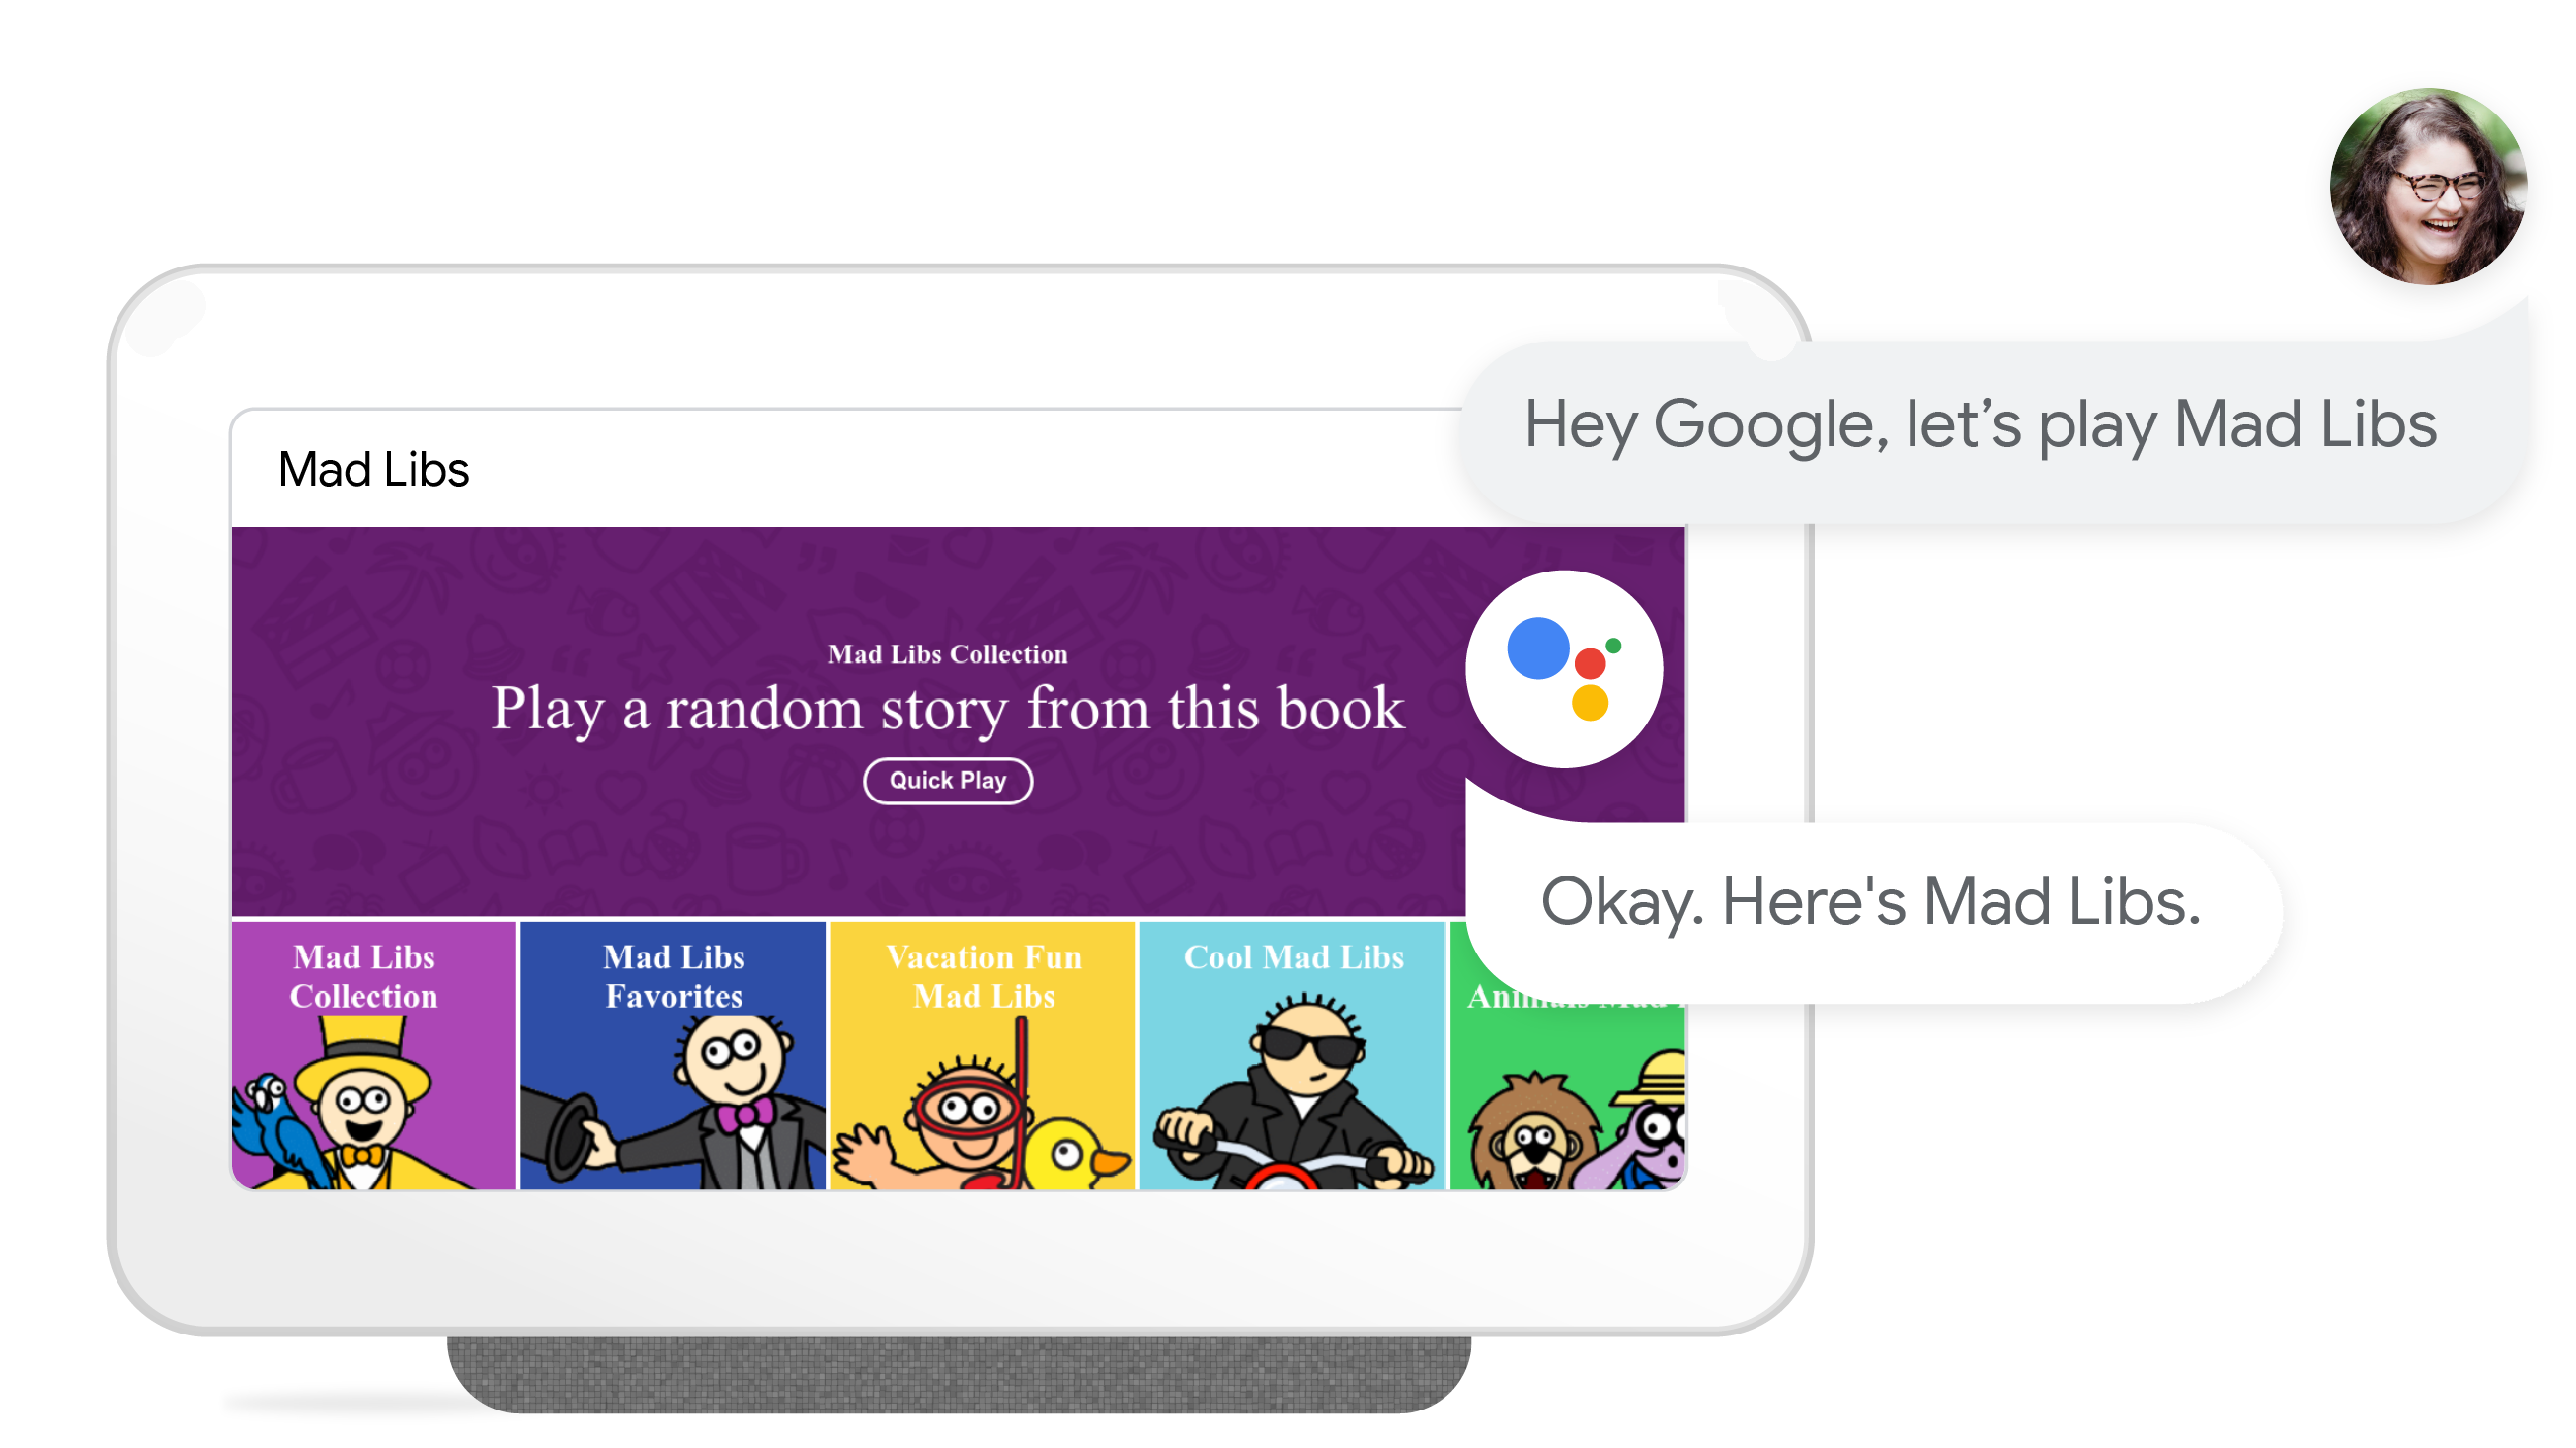 I cannot get past the location screen to play Google Assistant Games - Google  Assistant Community